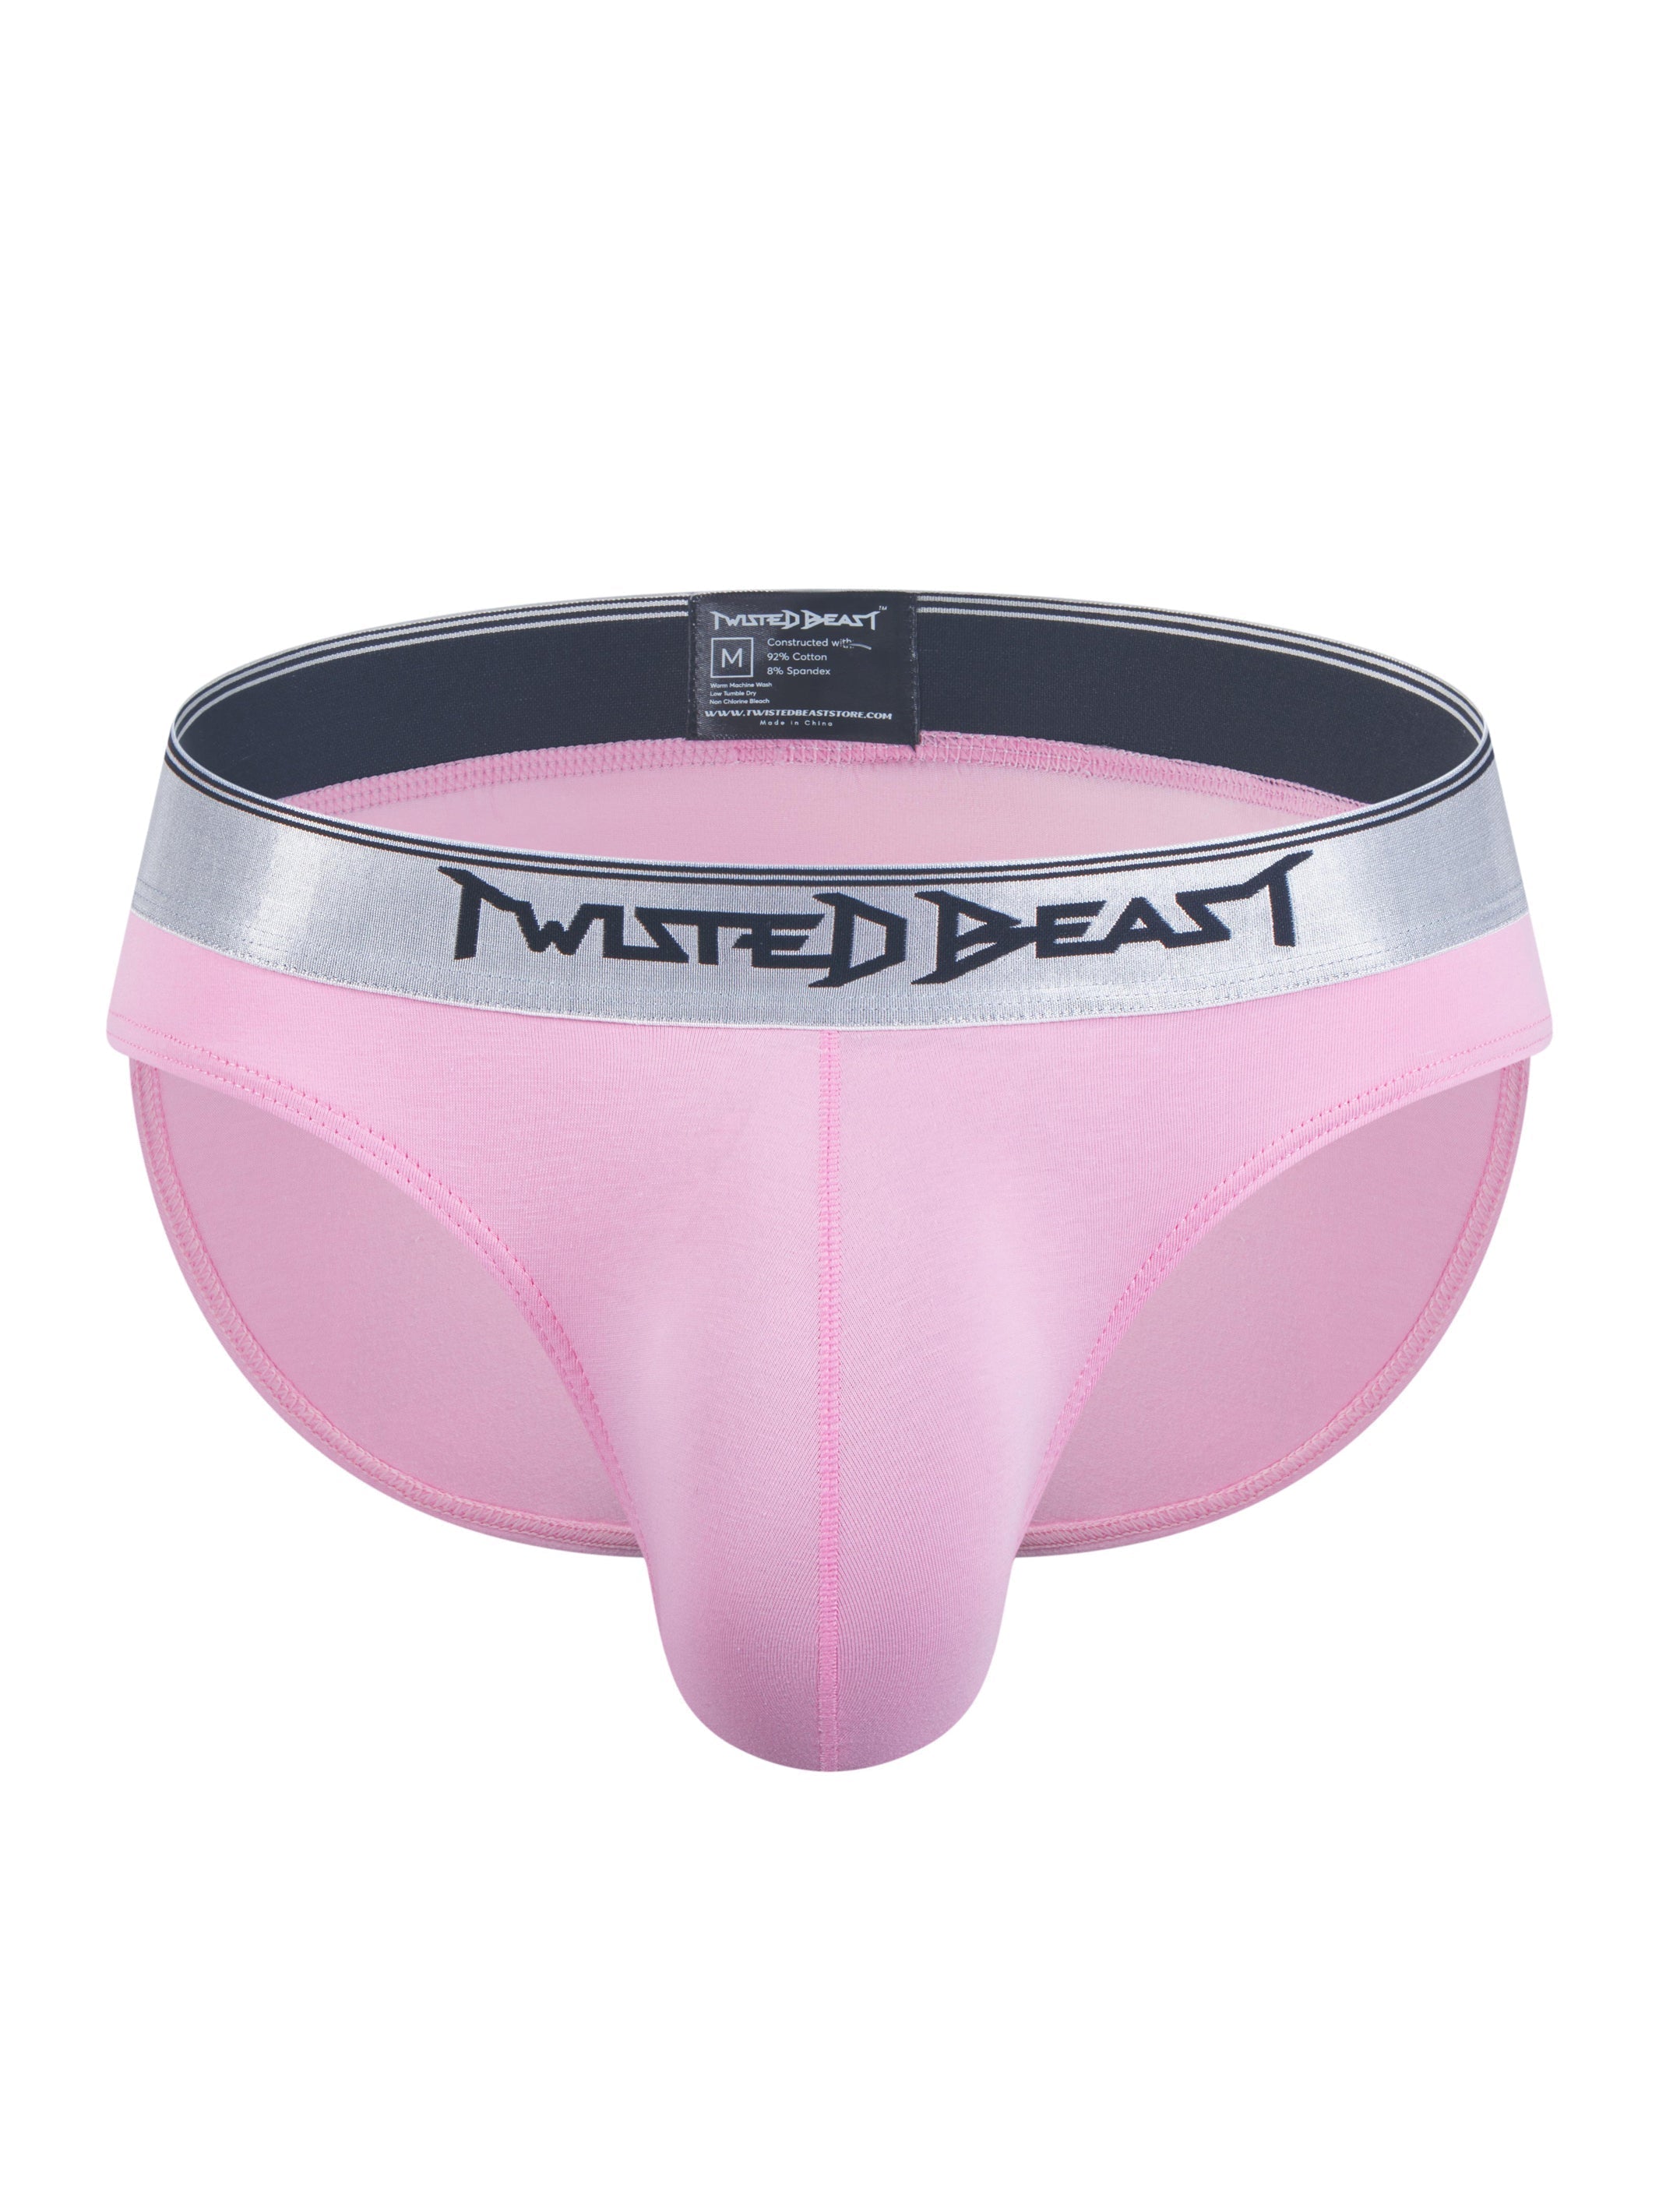 A frontal photo of a pair of pink Y2K Briefs by Twisted Beast.